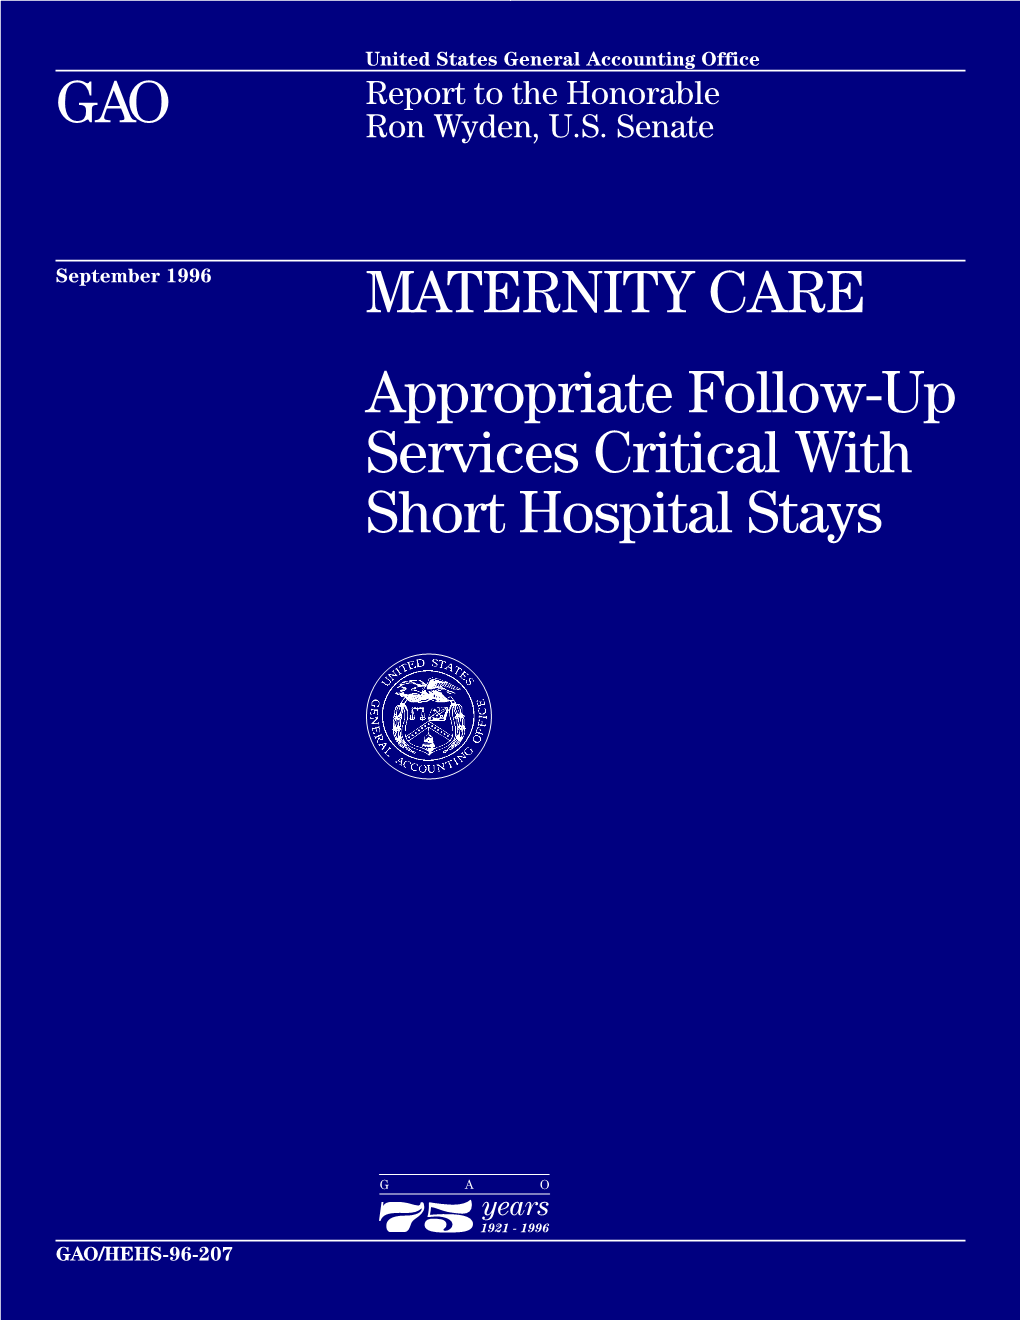 Appropriate Follow-Up Services Critical with Short Hospital Stays